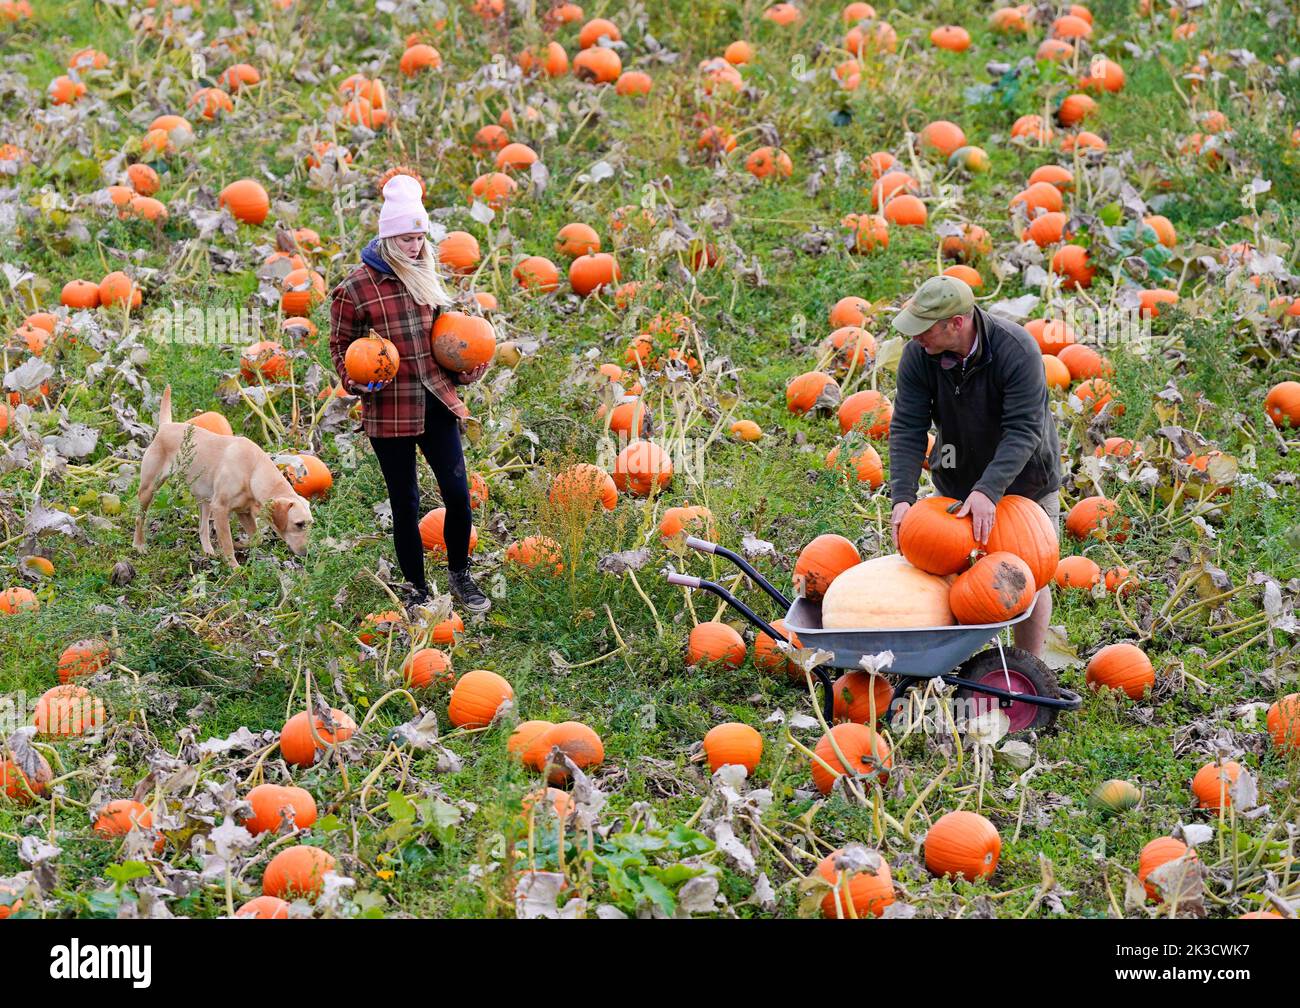 Farmer Tom Spilman (right) and Sandra Mlynarova (left) harvest some of the 100,000 pumkins that have been grown ahead of the Spilmans Pumpkin Festival, that opens this Saturday at Tom Spilmans' Pumpkin Farm in Thirsk. Picture date: Monday September 26, 2022. Planted in May, the farm has grown 20 varieties of pumpkins over 25 acres of land, for the pumpkin picking season ahead of Halloween. Stock Photo